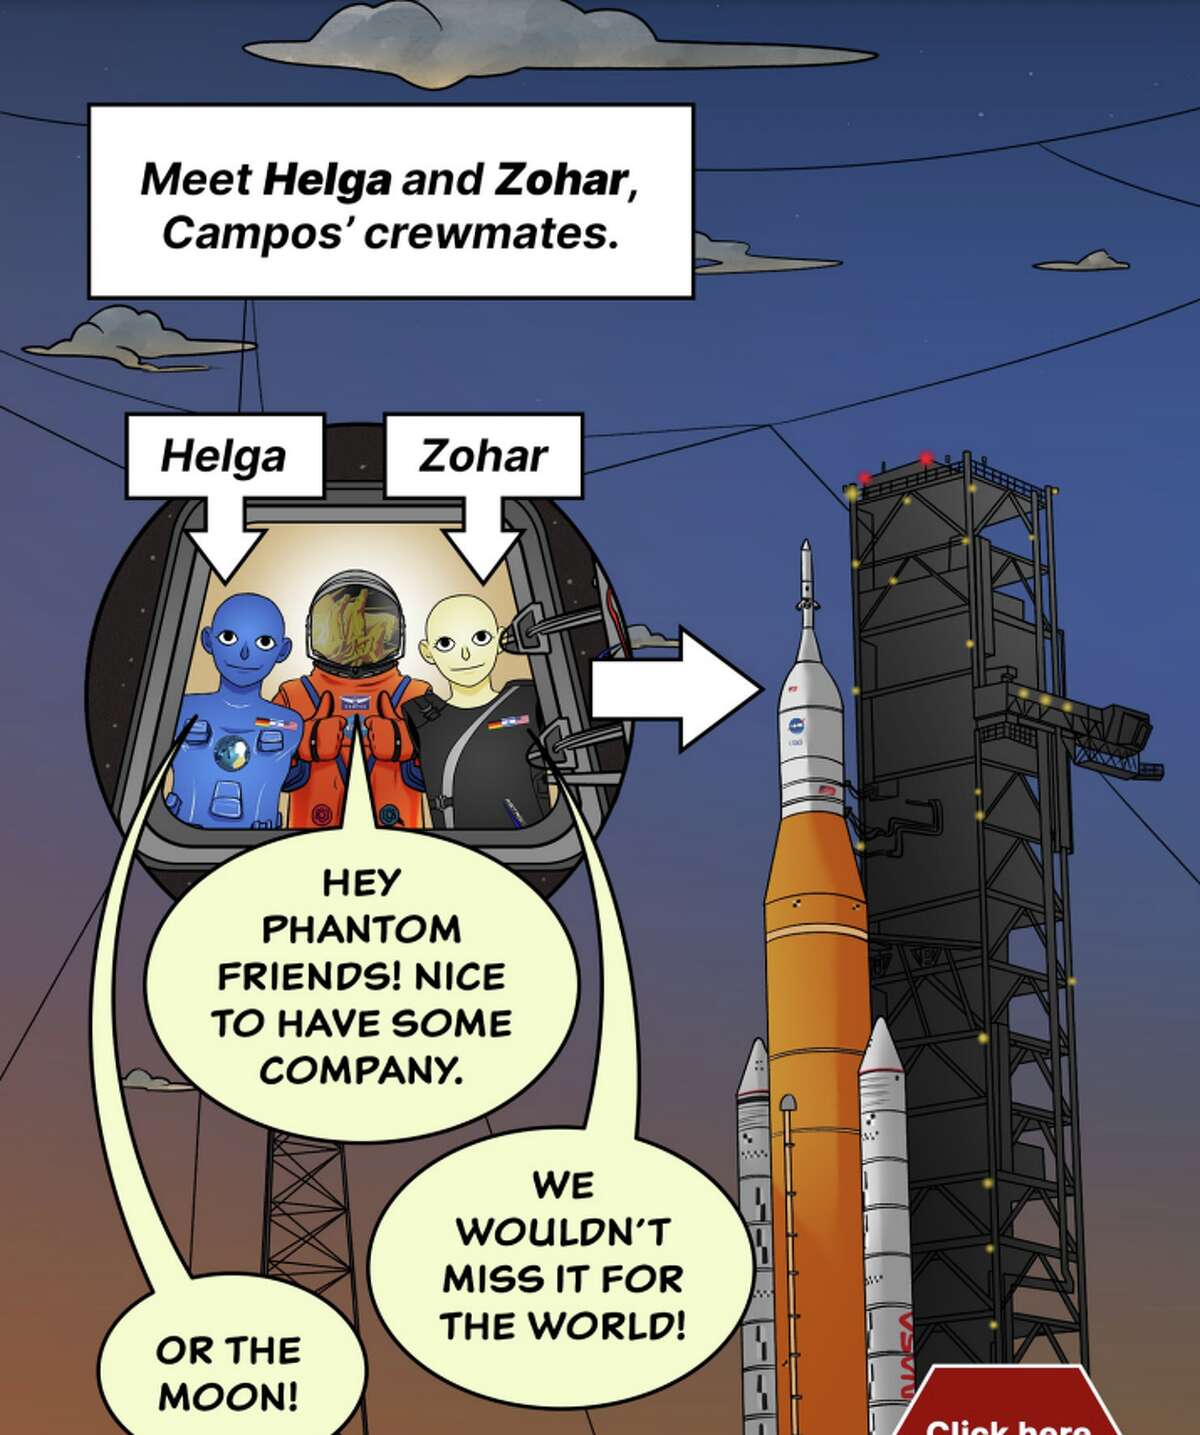 Several strips from the NASA comic book "The Adventures of Commander Moonikin Campos and Friends". The current issue released by NASA is barely part 1 which is titled "Introducing Commander Moonikin Campos".